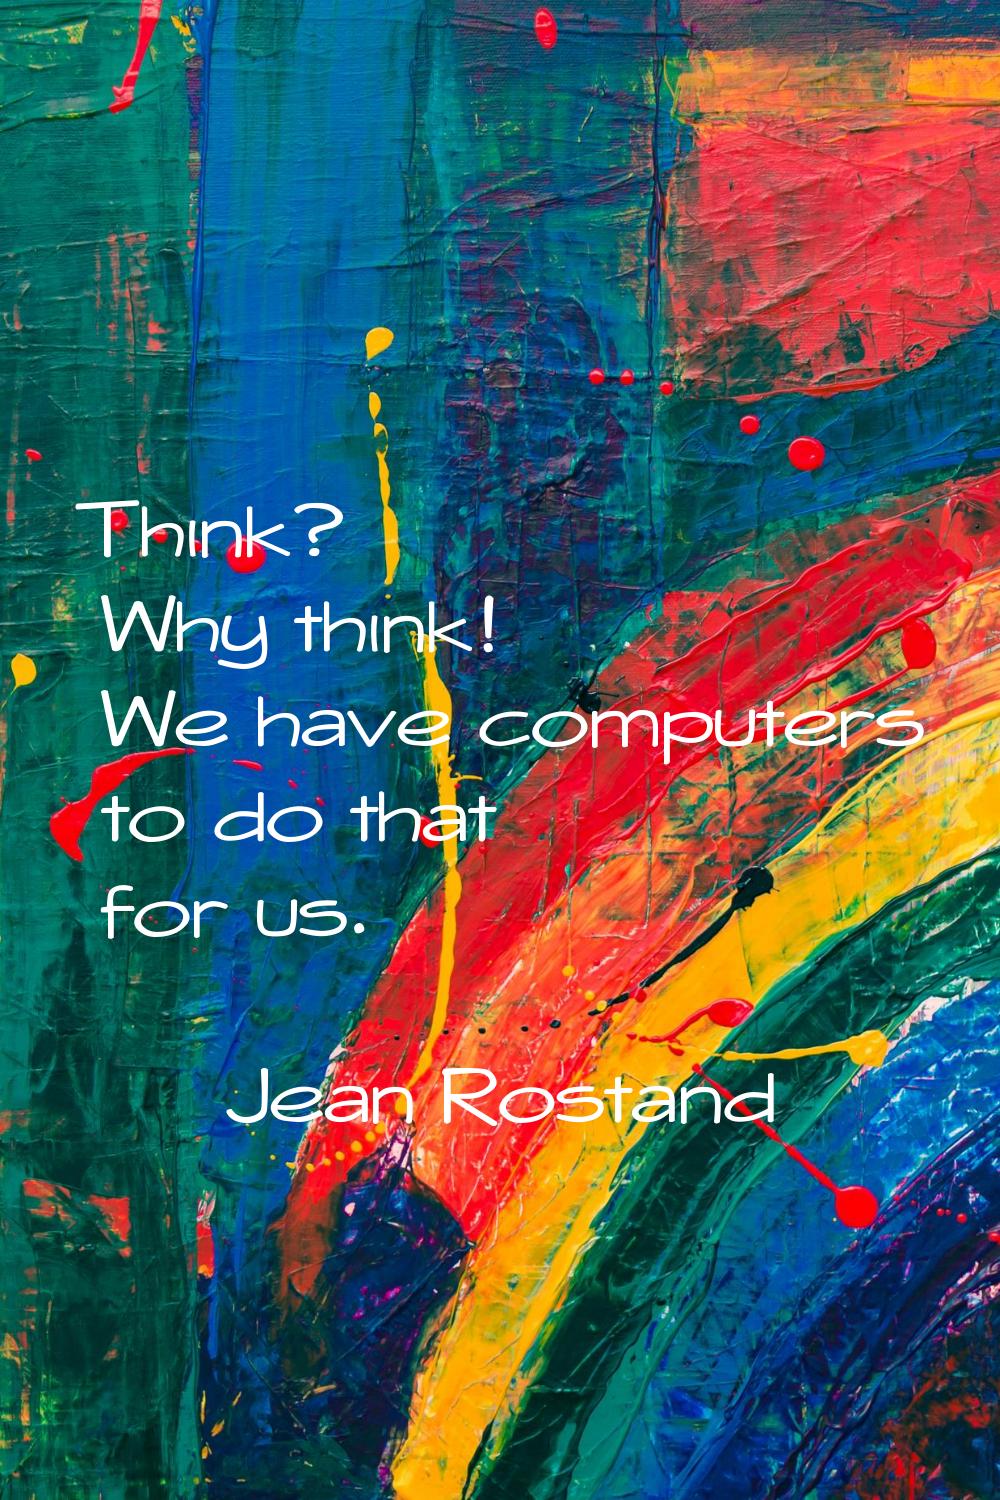 Think? Why think! We have computers to do that for us.